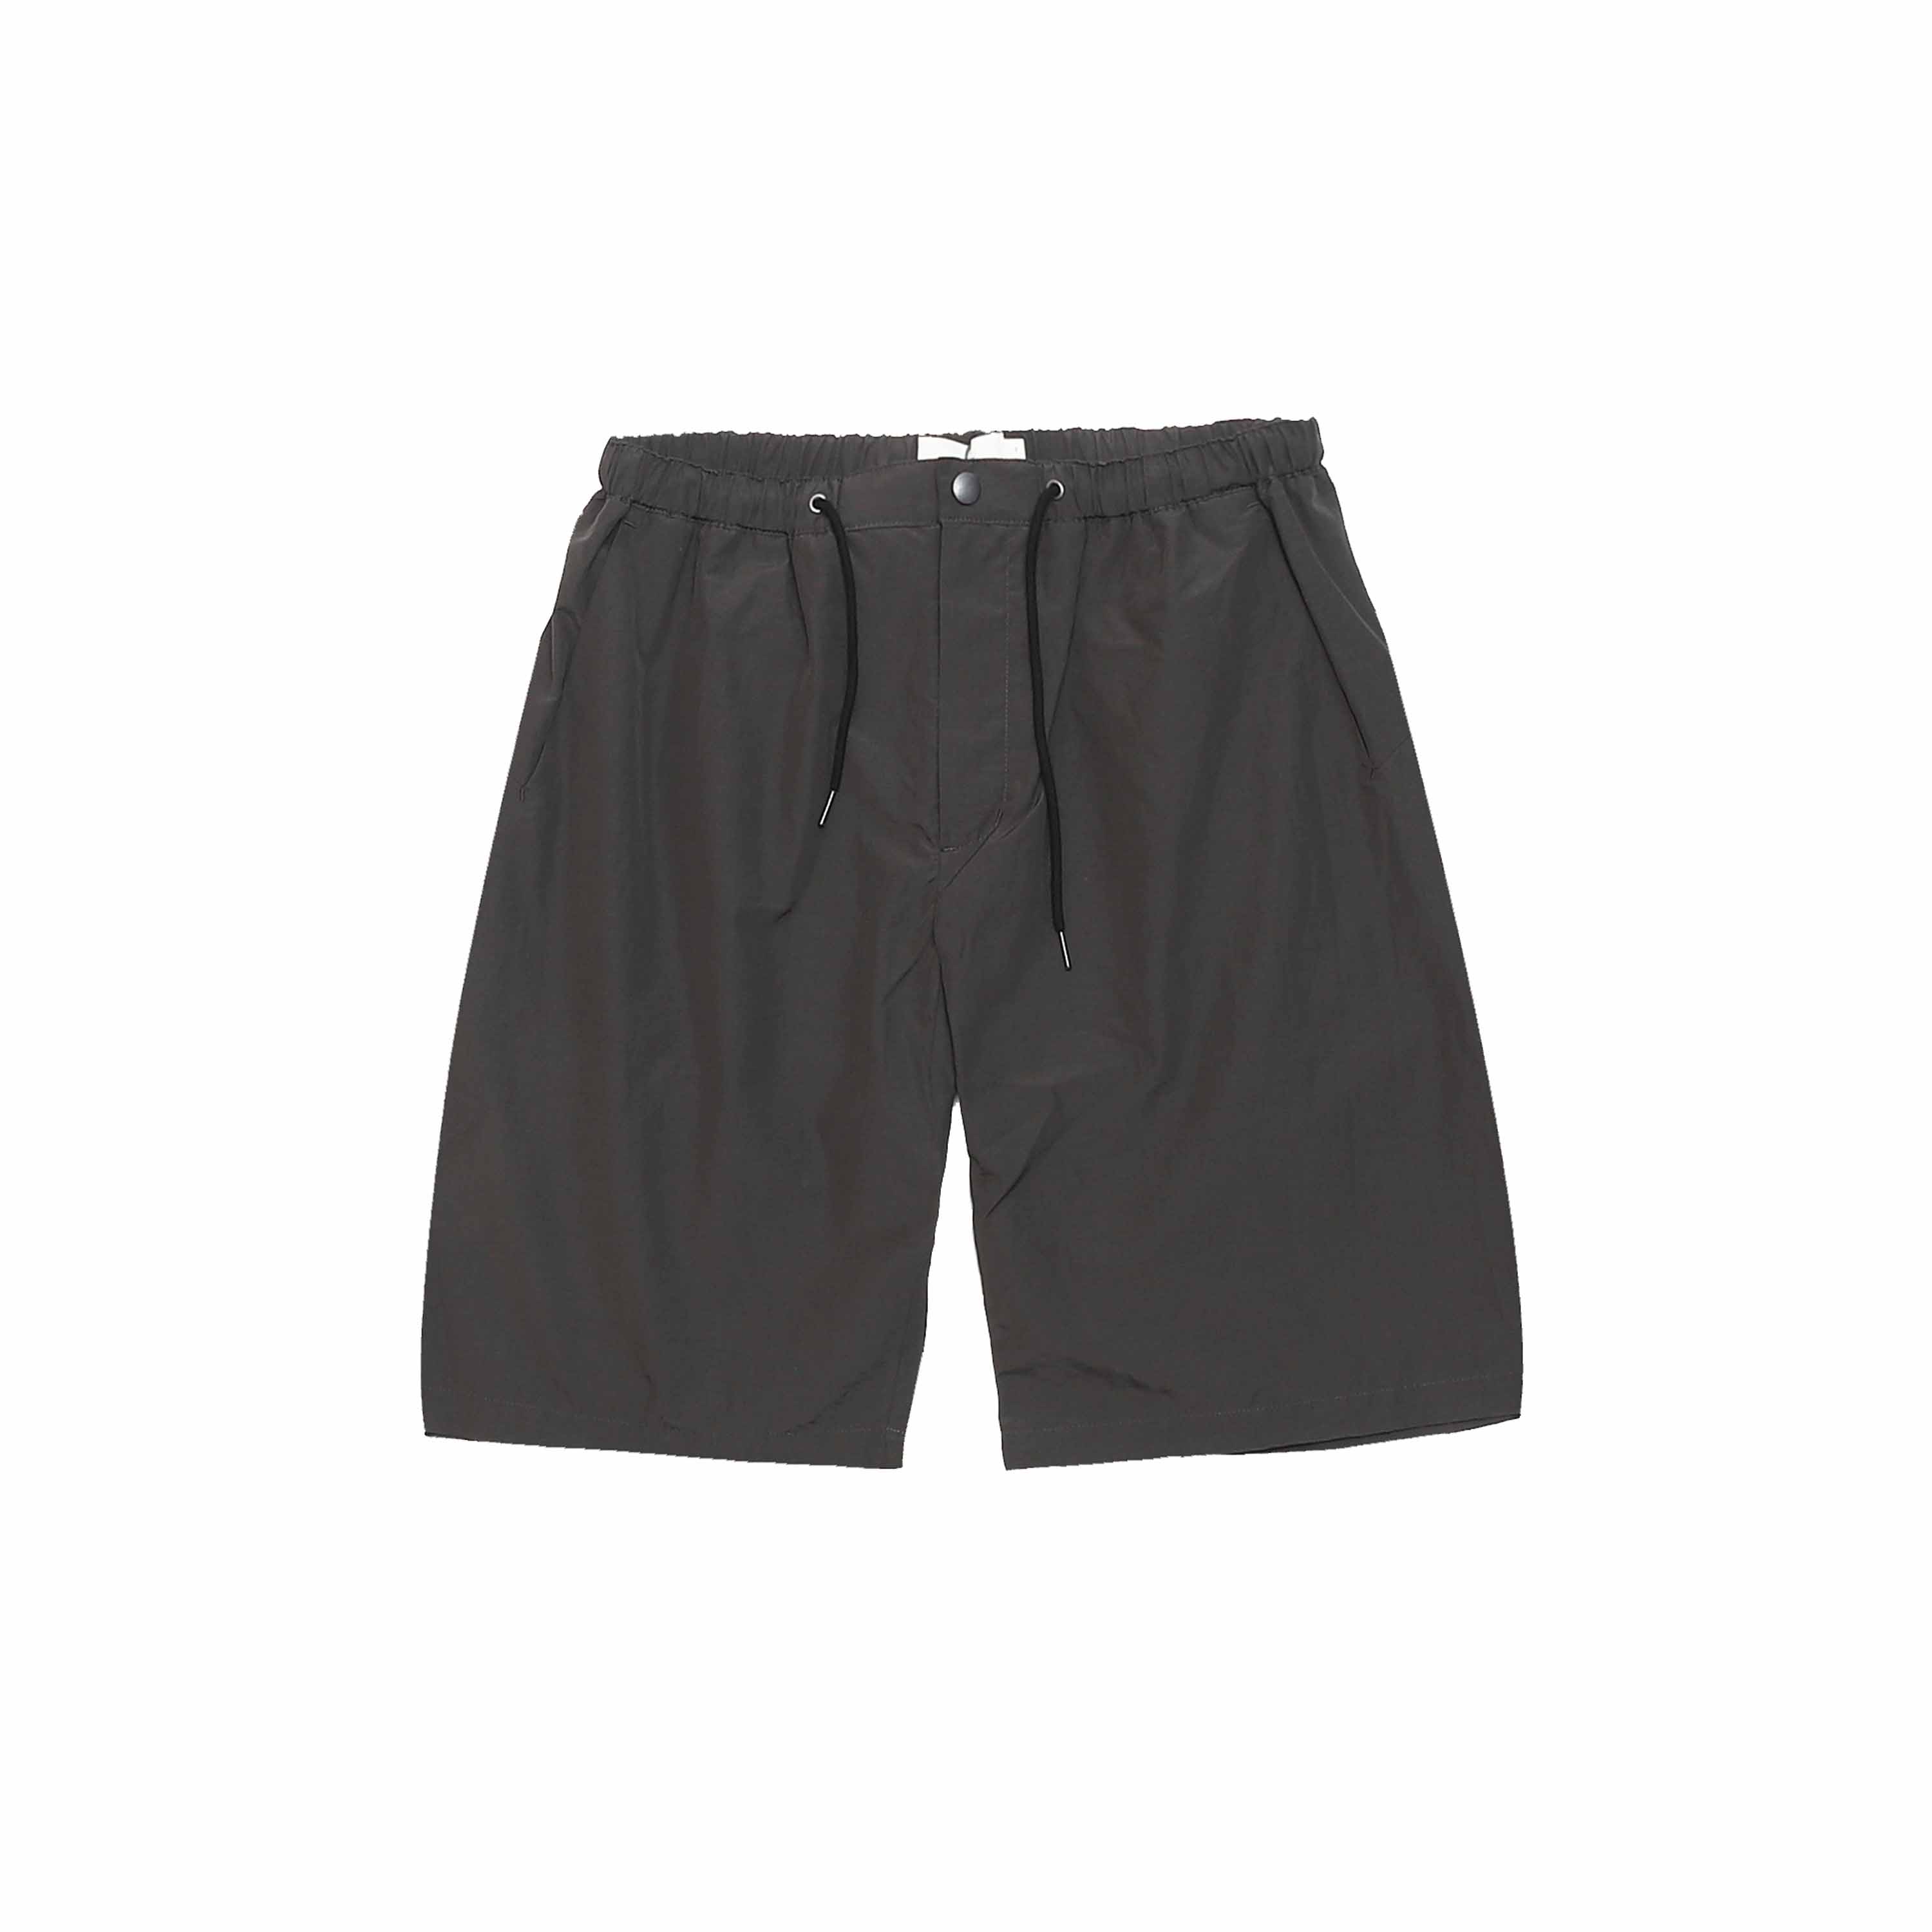 PACKABLE TRAVELLER SHORTS - CHARCOAL